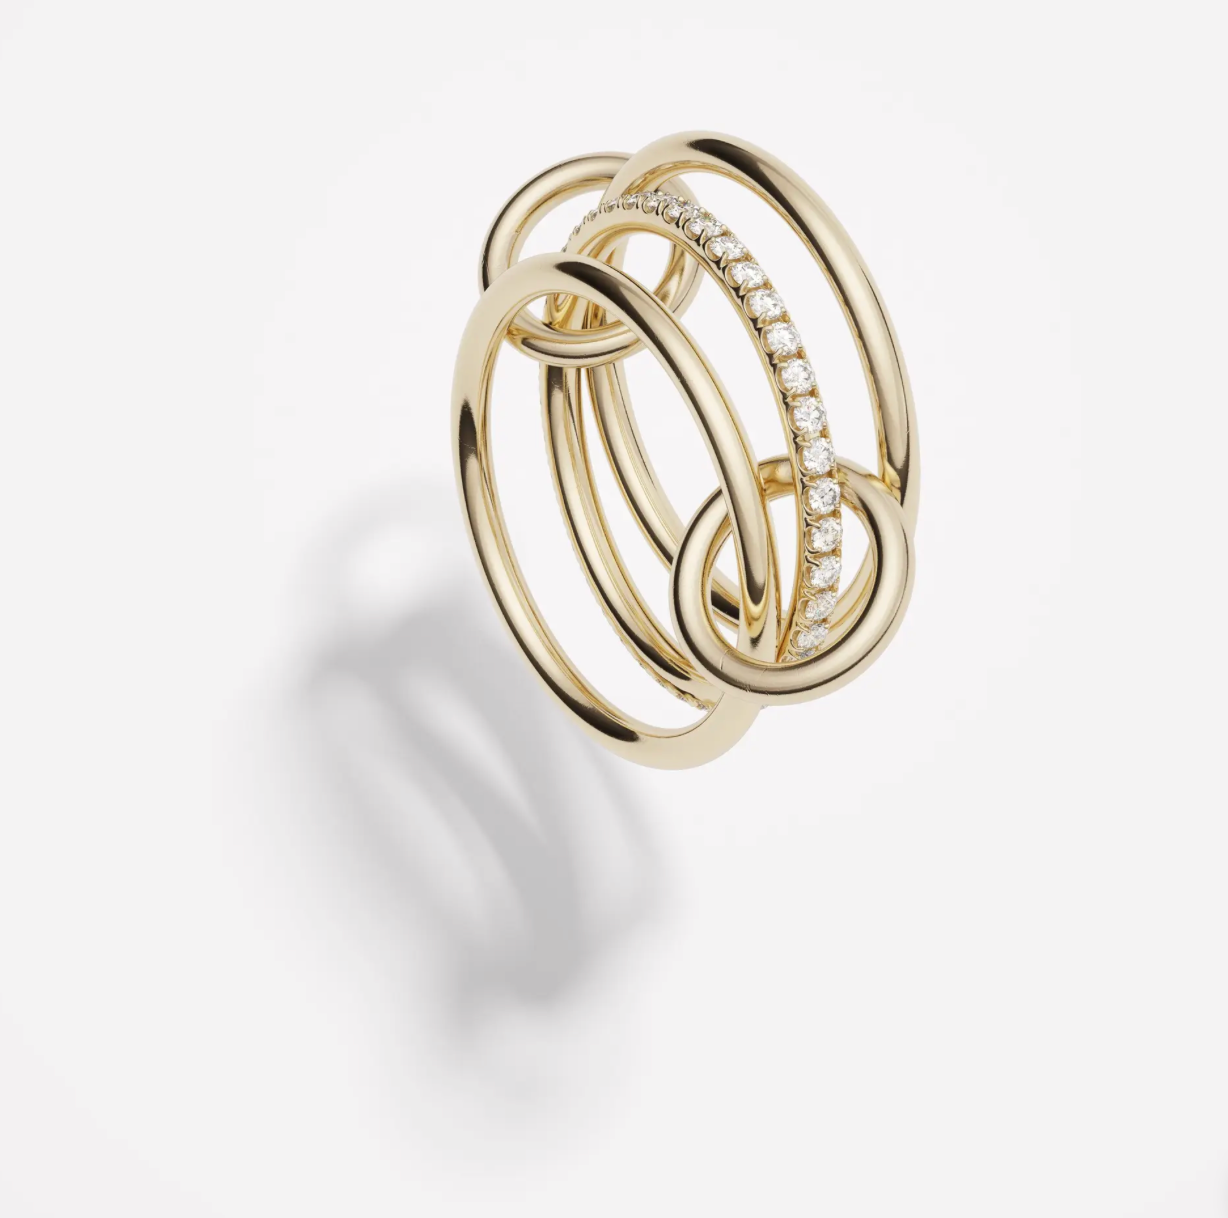 Sonny 18k Yellow Gold Band Ring